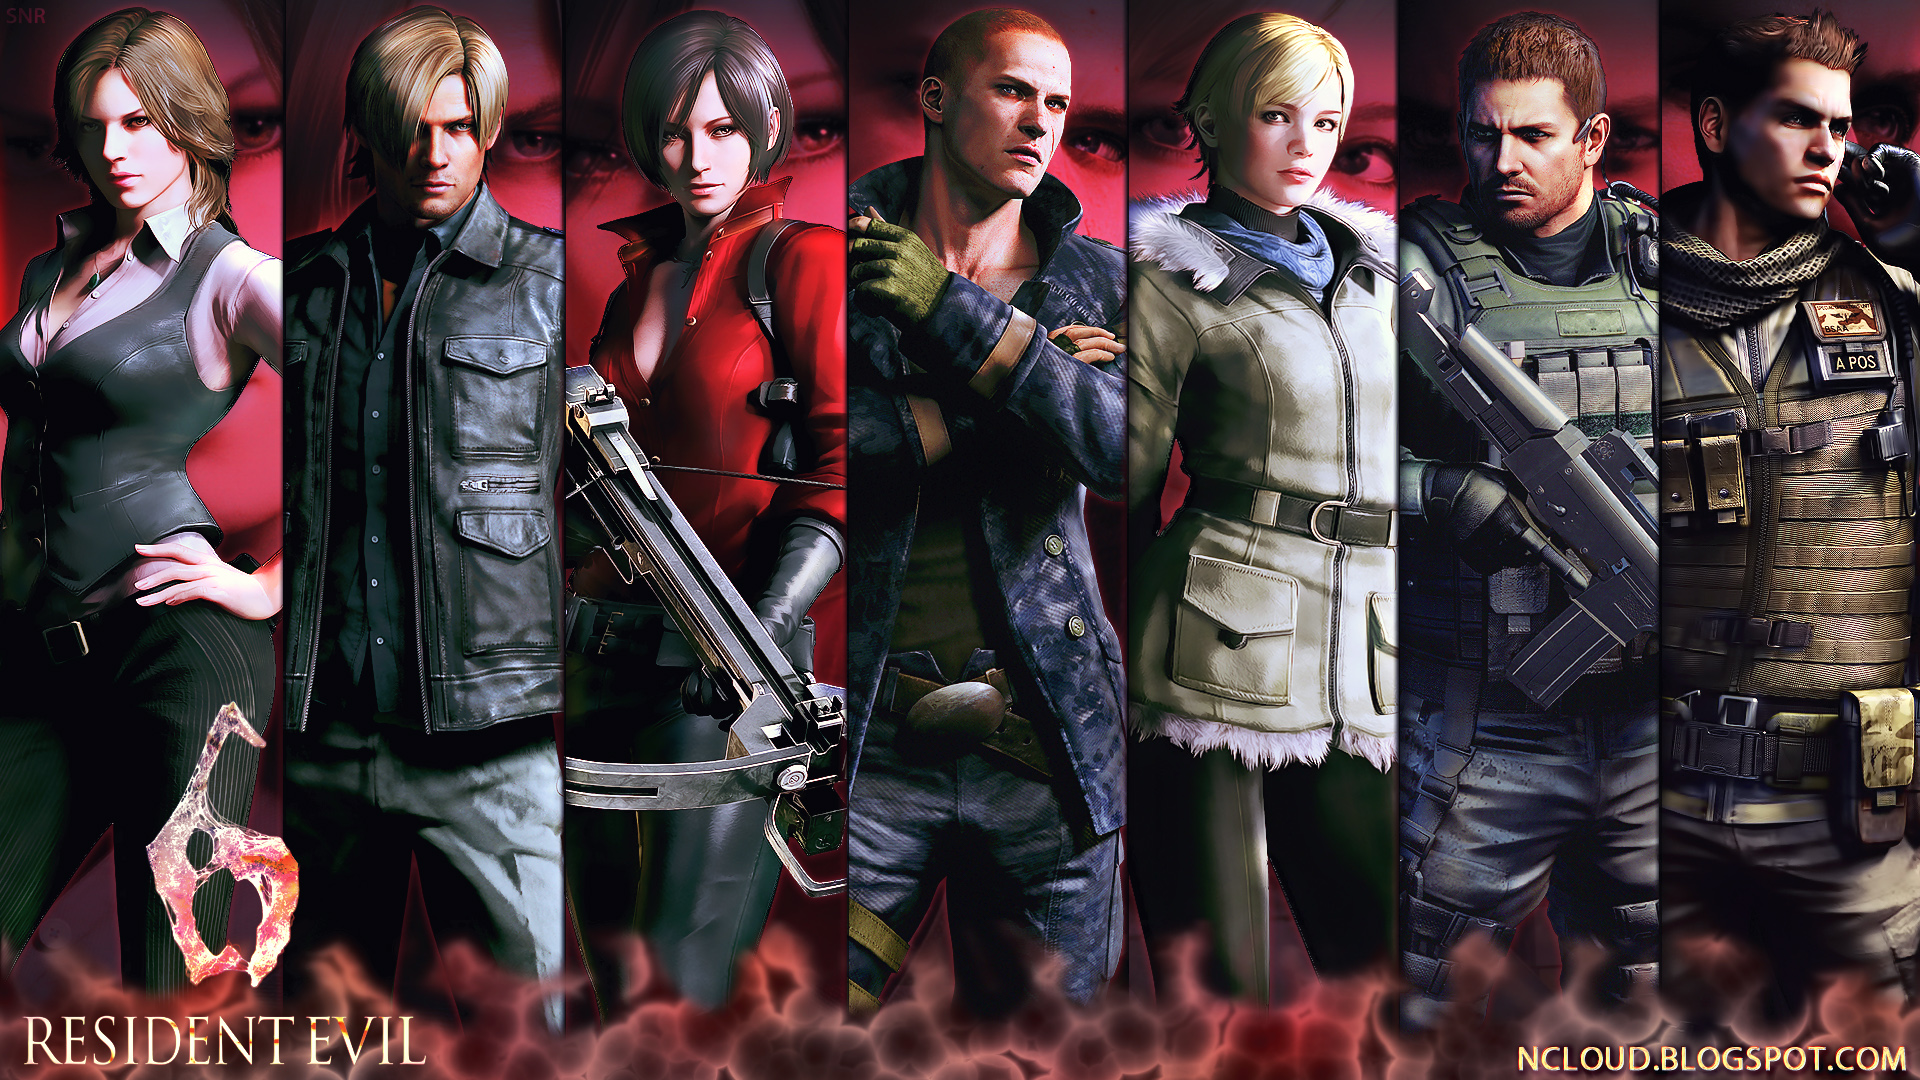 Games Movies Music Anime: My Resident Evil 6 Wallpaper 6